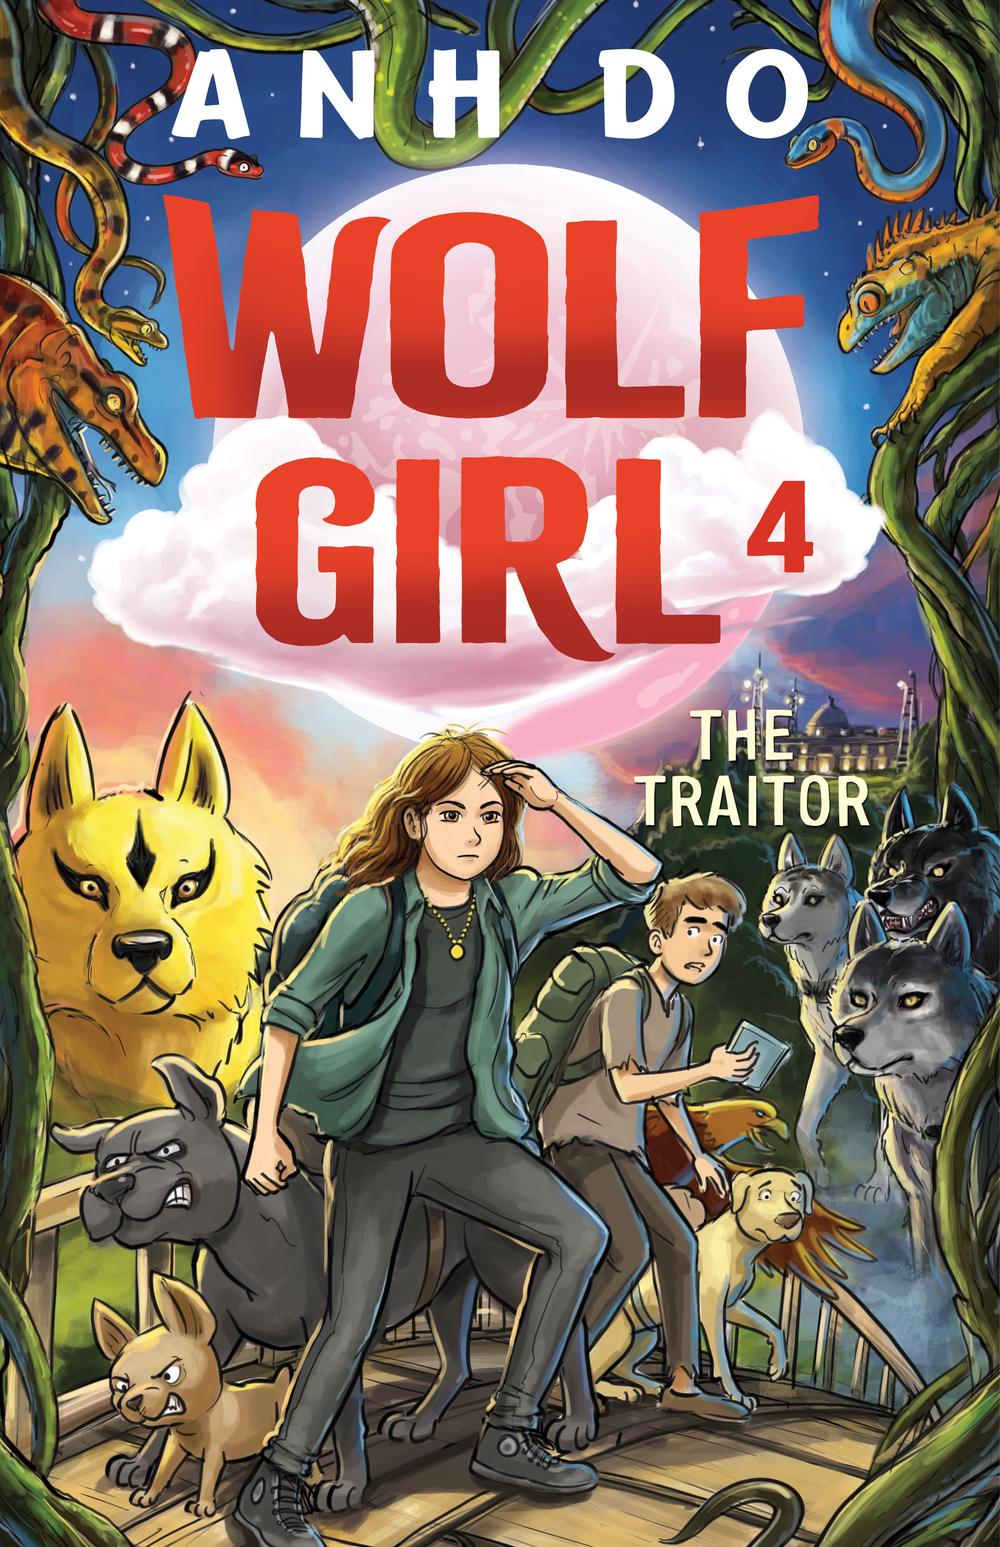 The Traitor: Wolf Girl 4 by Anh Do, Paperback, 9781760877866 | Buy ...